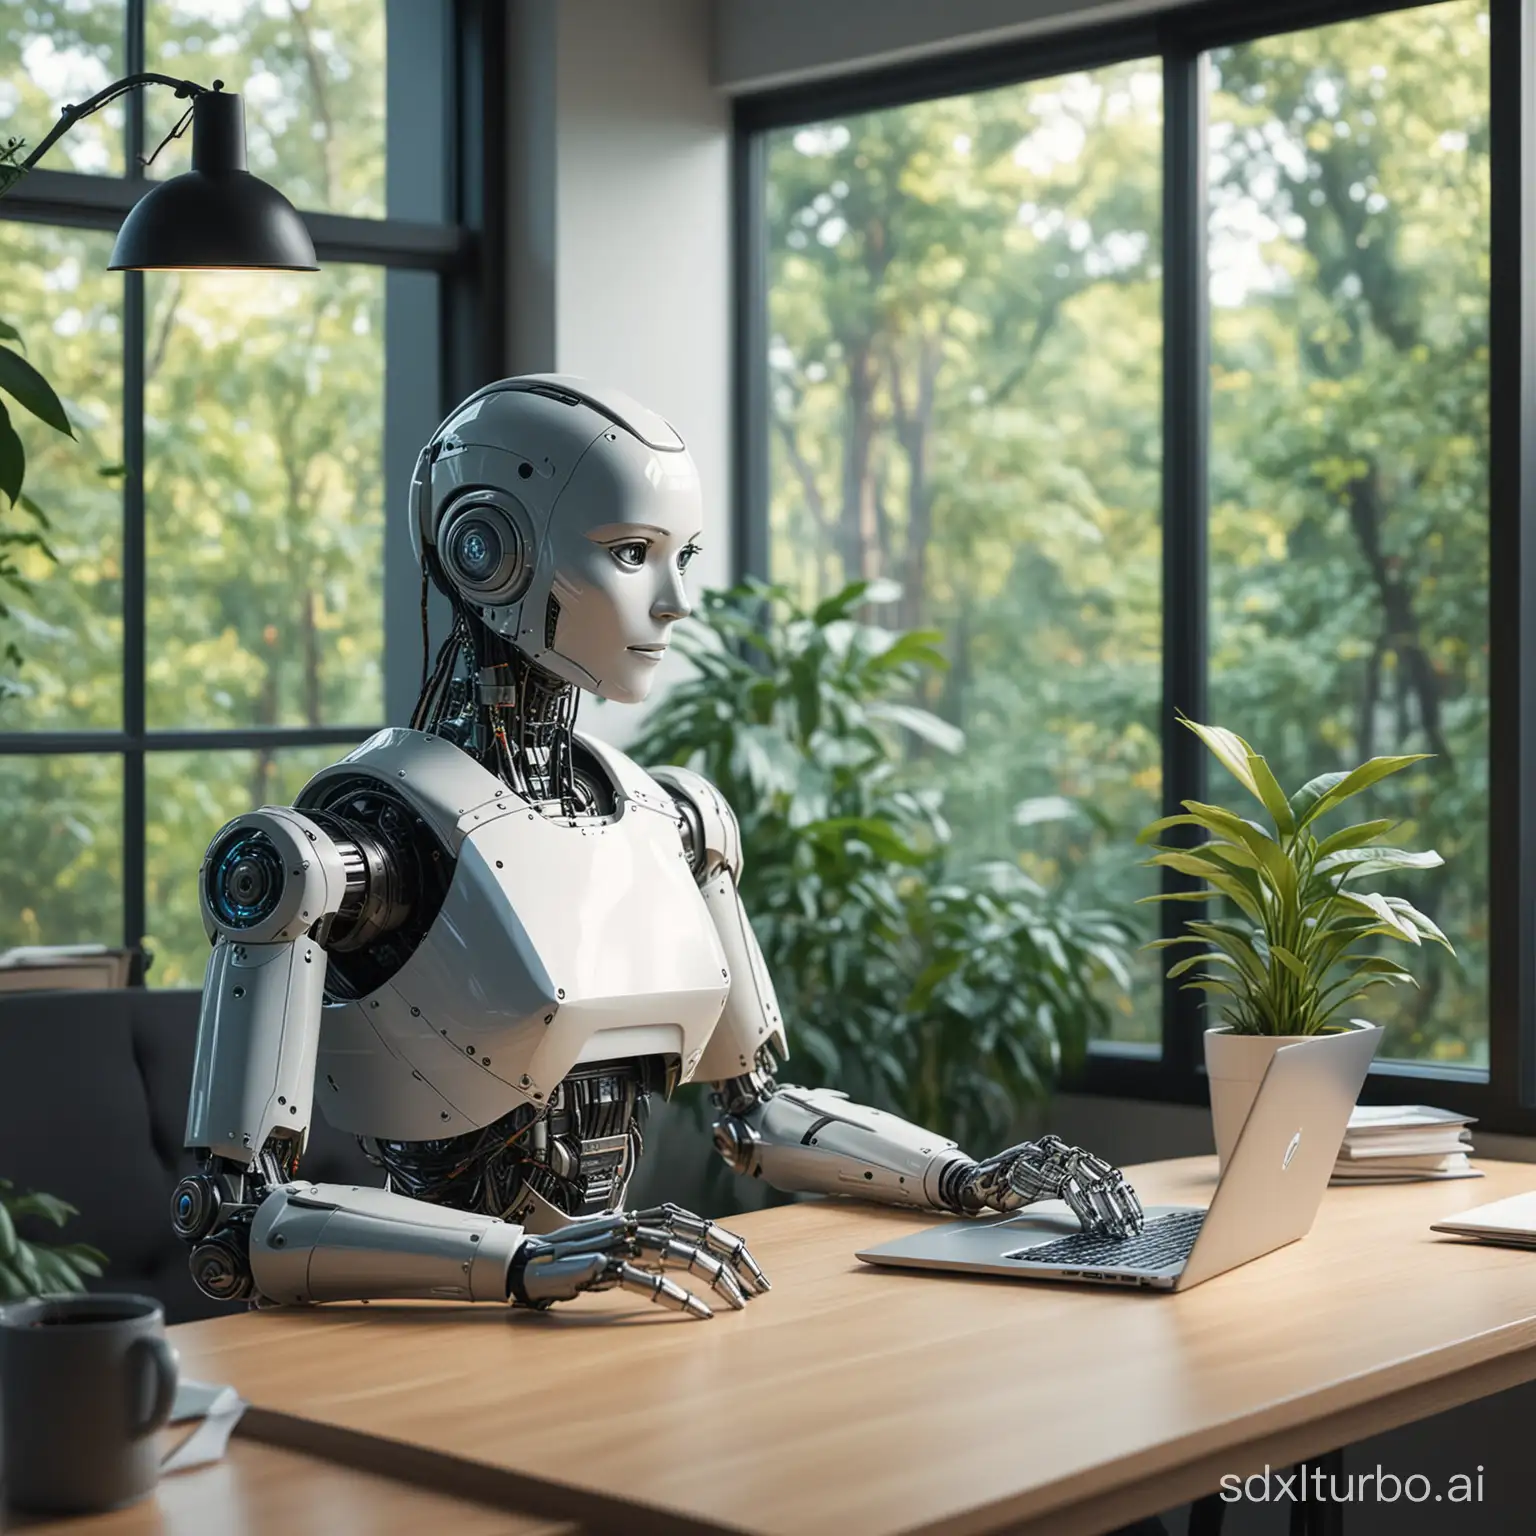 The female robot is staring intently at the monitor in front of it, which shows a code editor, alongside a laptop and some files. These details imply that the robot may be working on programming or a related high-tech job. In addition, there is a cup of coffee and a potted plant on the desk, elements that add a touch of life to the scene and make the robot's image seem more humanized.

In the background, a large window brings plenty of light into the room, and the trees outside the window are faintly visible, adding a touch of nature to the whole scene. The layout of the whole office is simple and modern, full of futuristic feeling, but also reveals a cozy and peaceful atmosphere